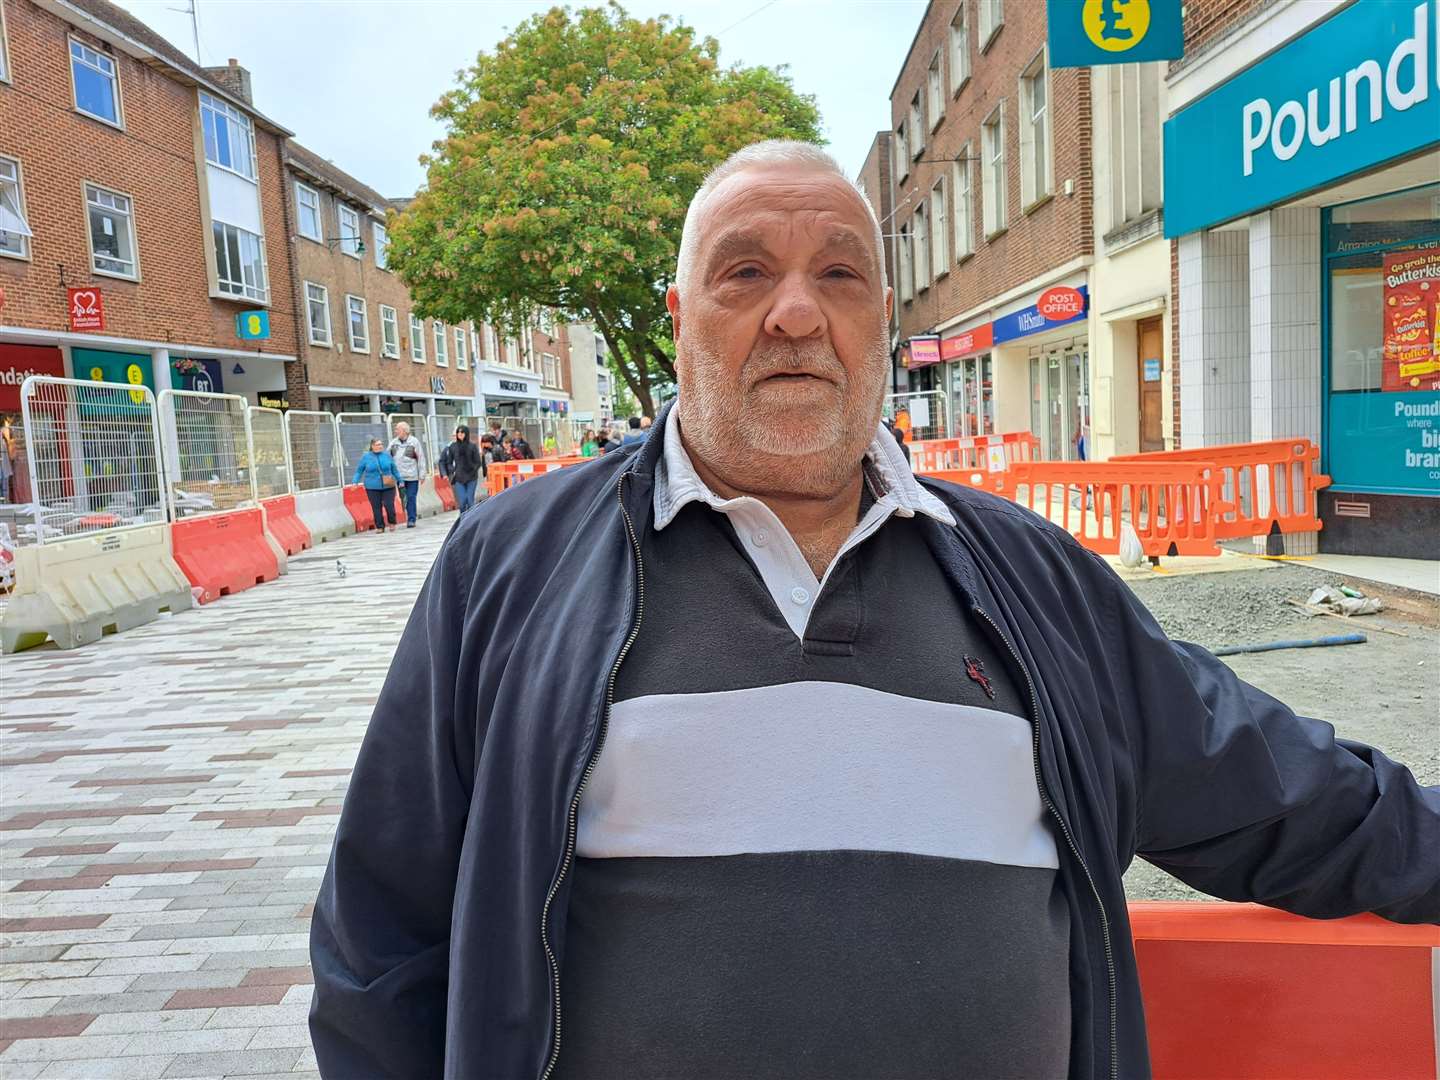 Brian Irving, 71, said that although the new pavement looks a mess at the moment he hopes that it will look better once complete